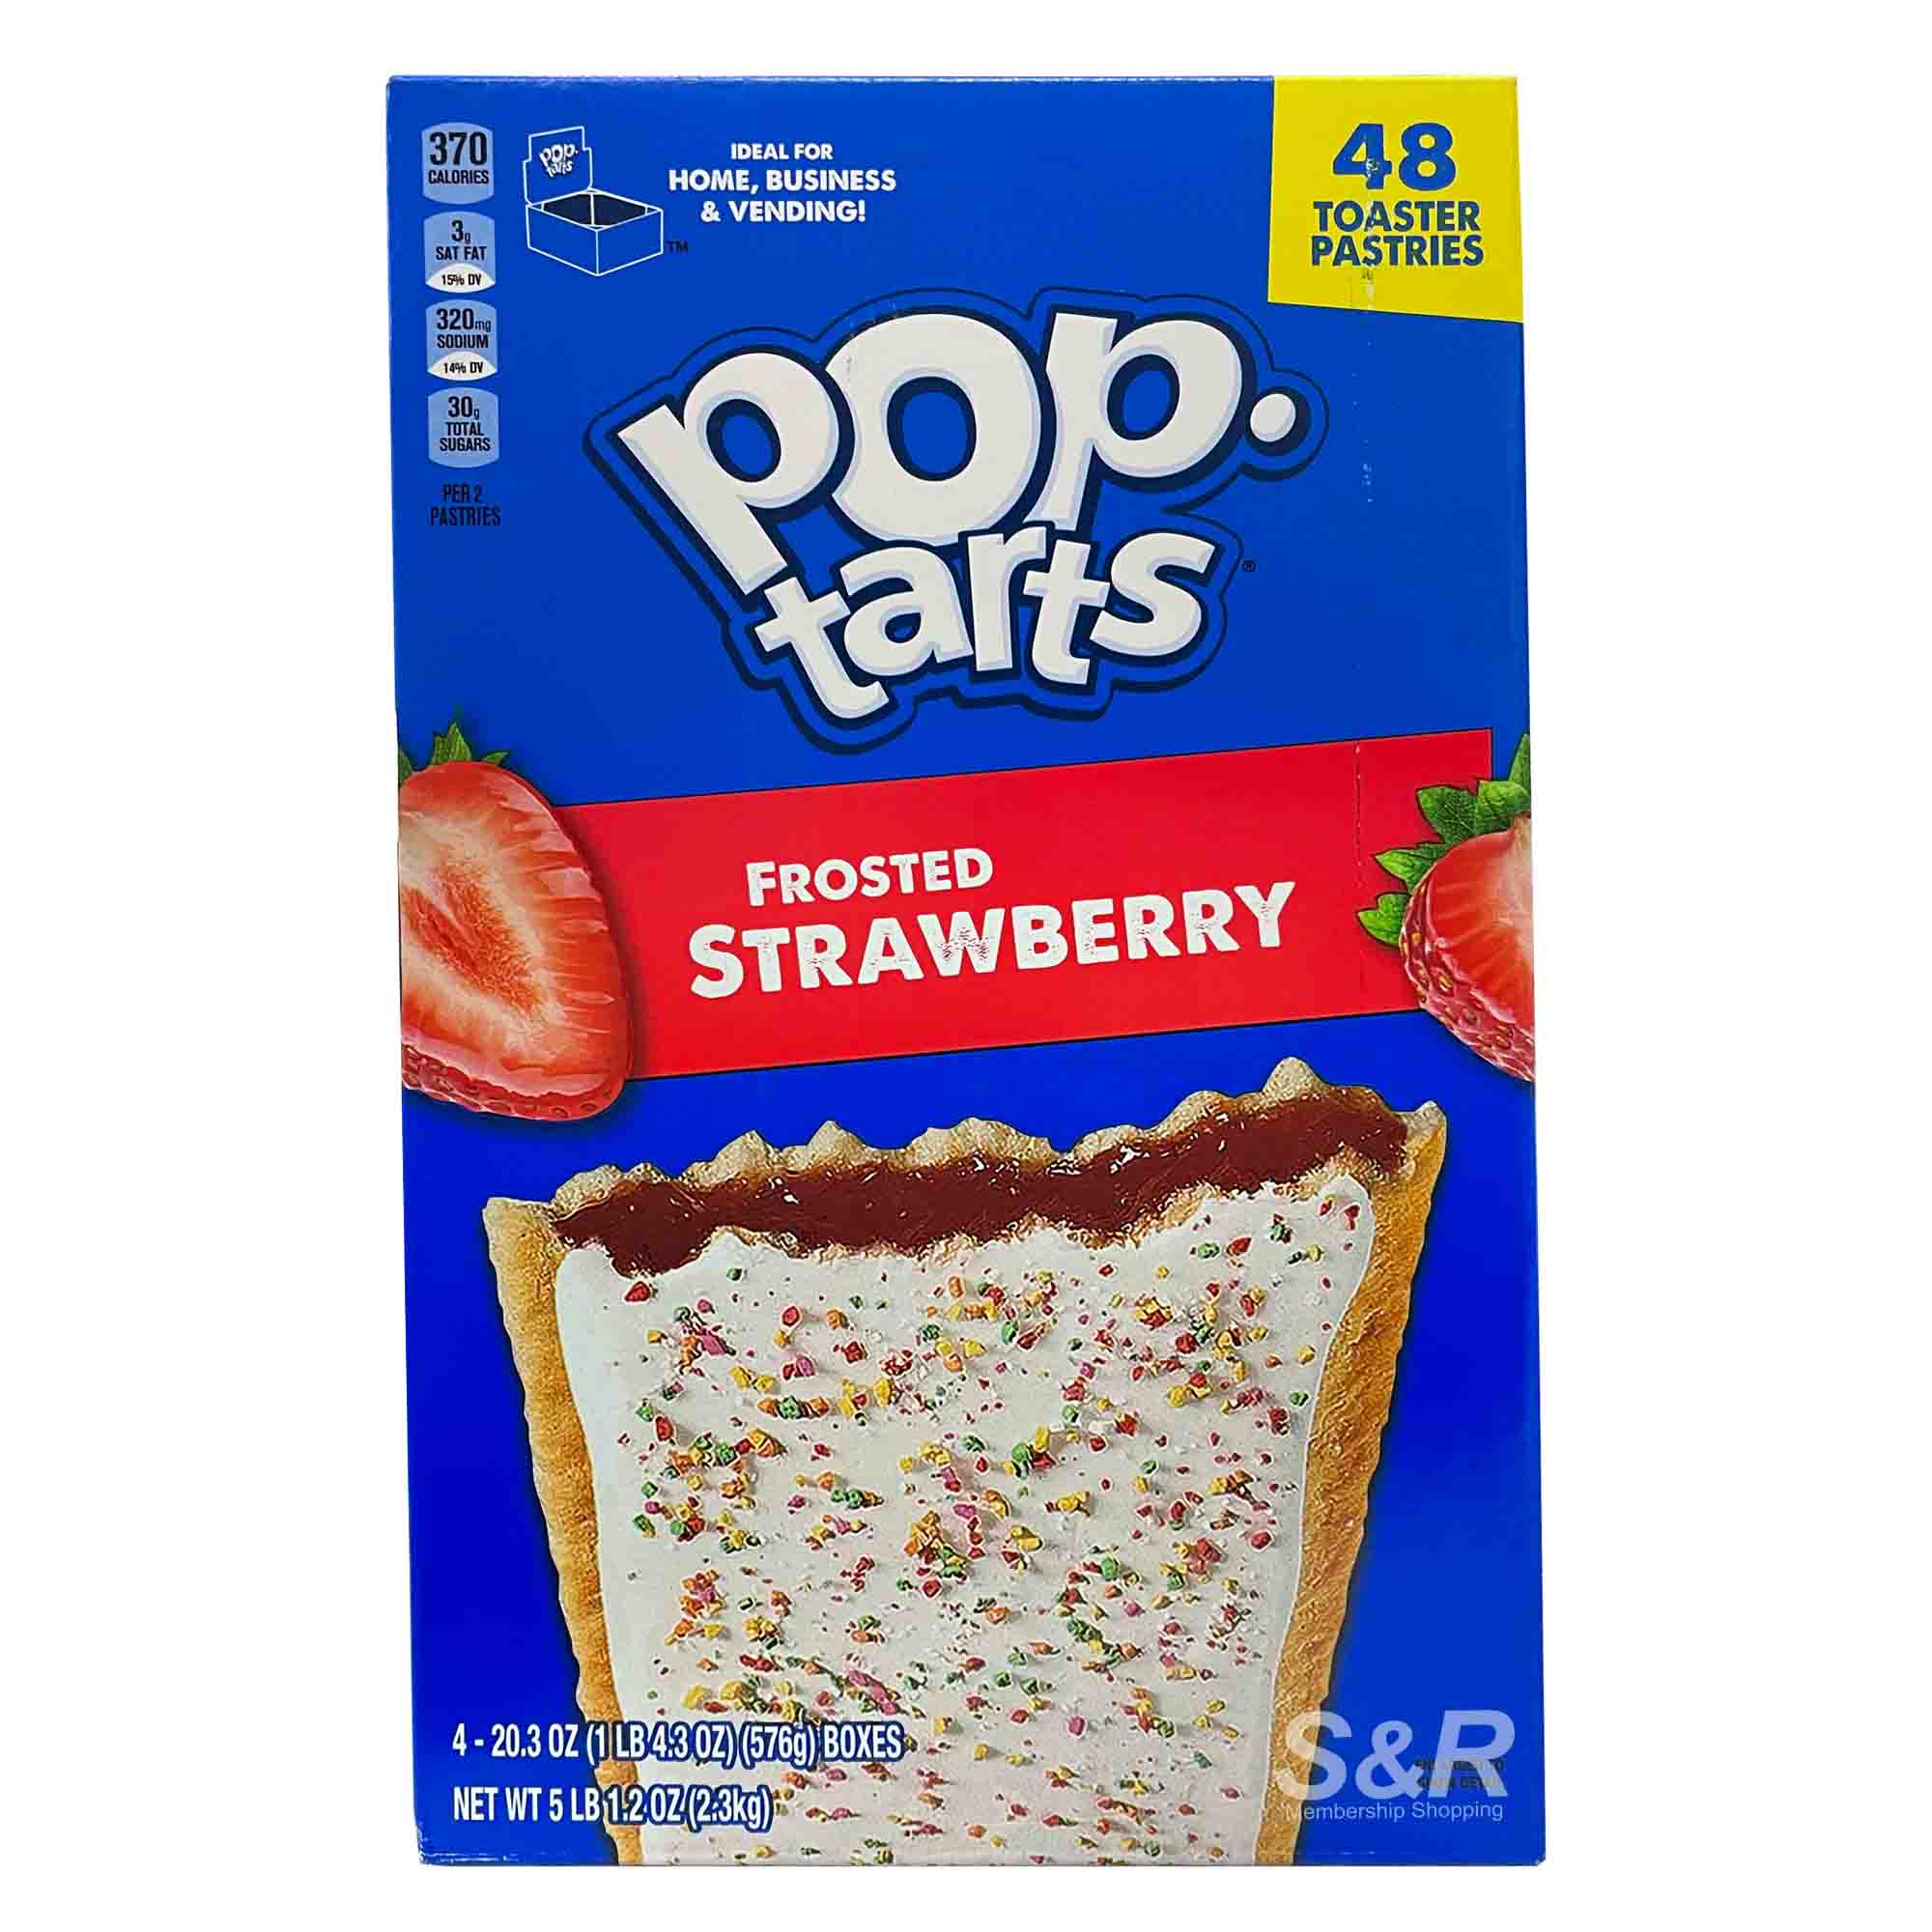 https://www.snrshopping.com/upload/product/Kellogg-s-Pop-Tarts-Frosted-Strawberry-Toaster-Pastries--48g-x-48pcs--4510/Kelloggs%20PopTarts%20Frosted%20Strawberry%20Toaster%20Pastries%2048g%20x%2048pcs-RAaYdo80BG.jpg